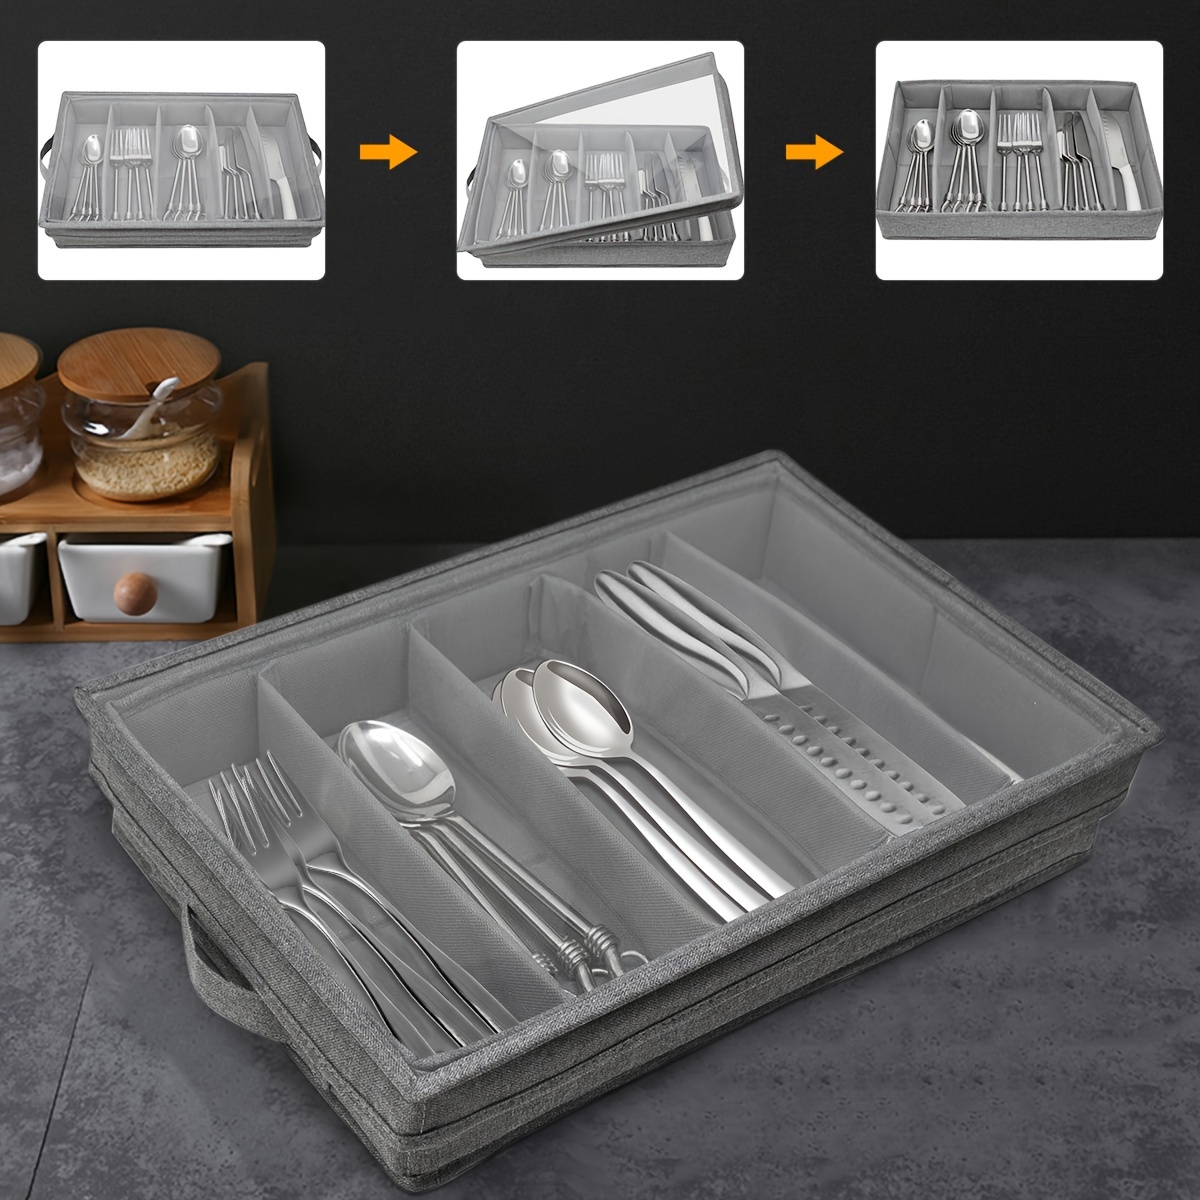 Flatware Storage Case Portable Cutlery Tray Holder With 4